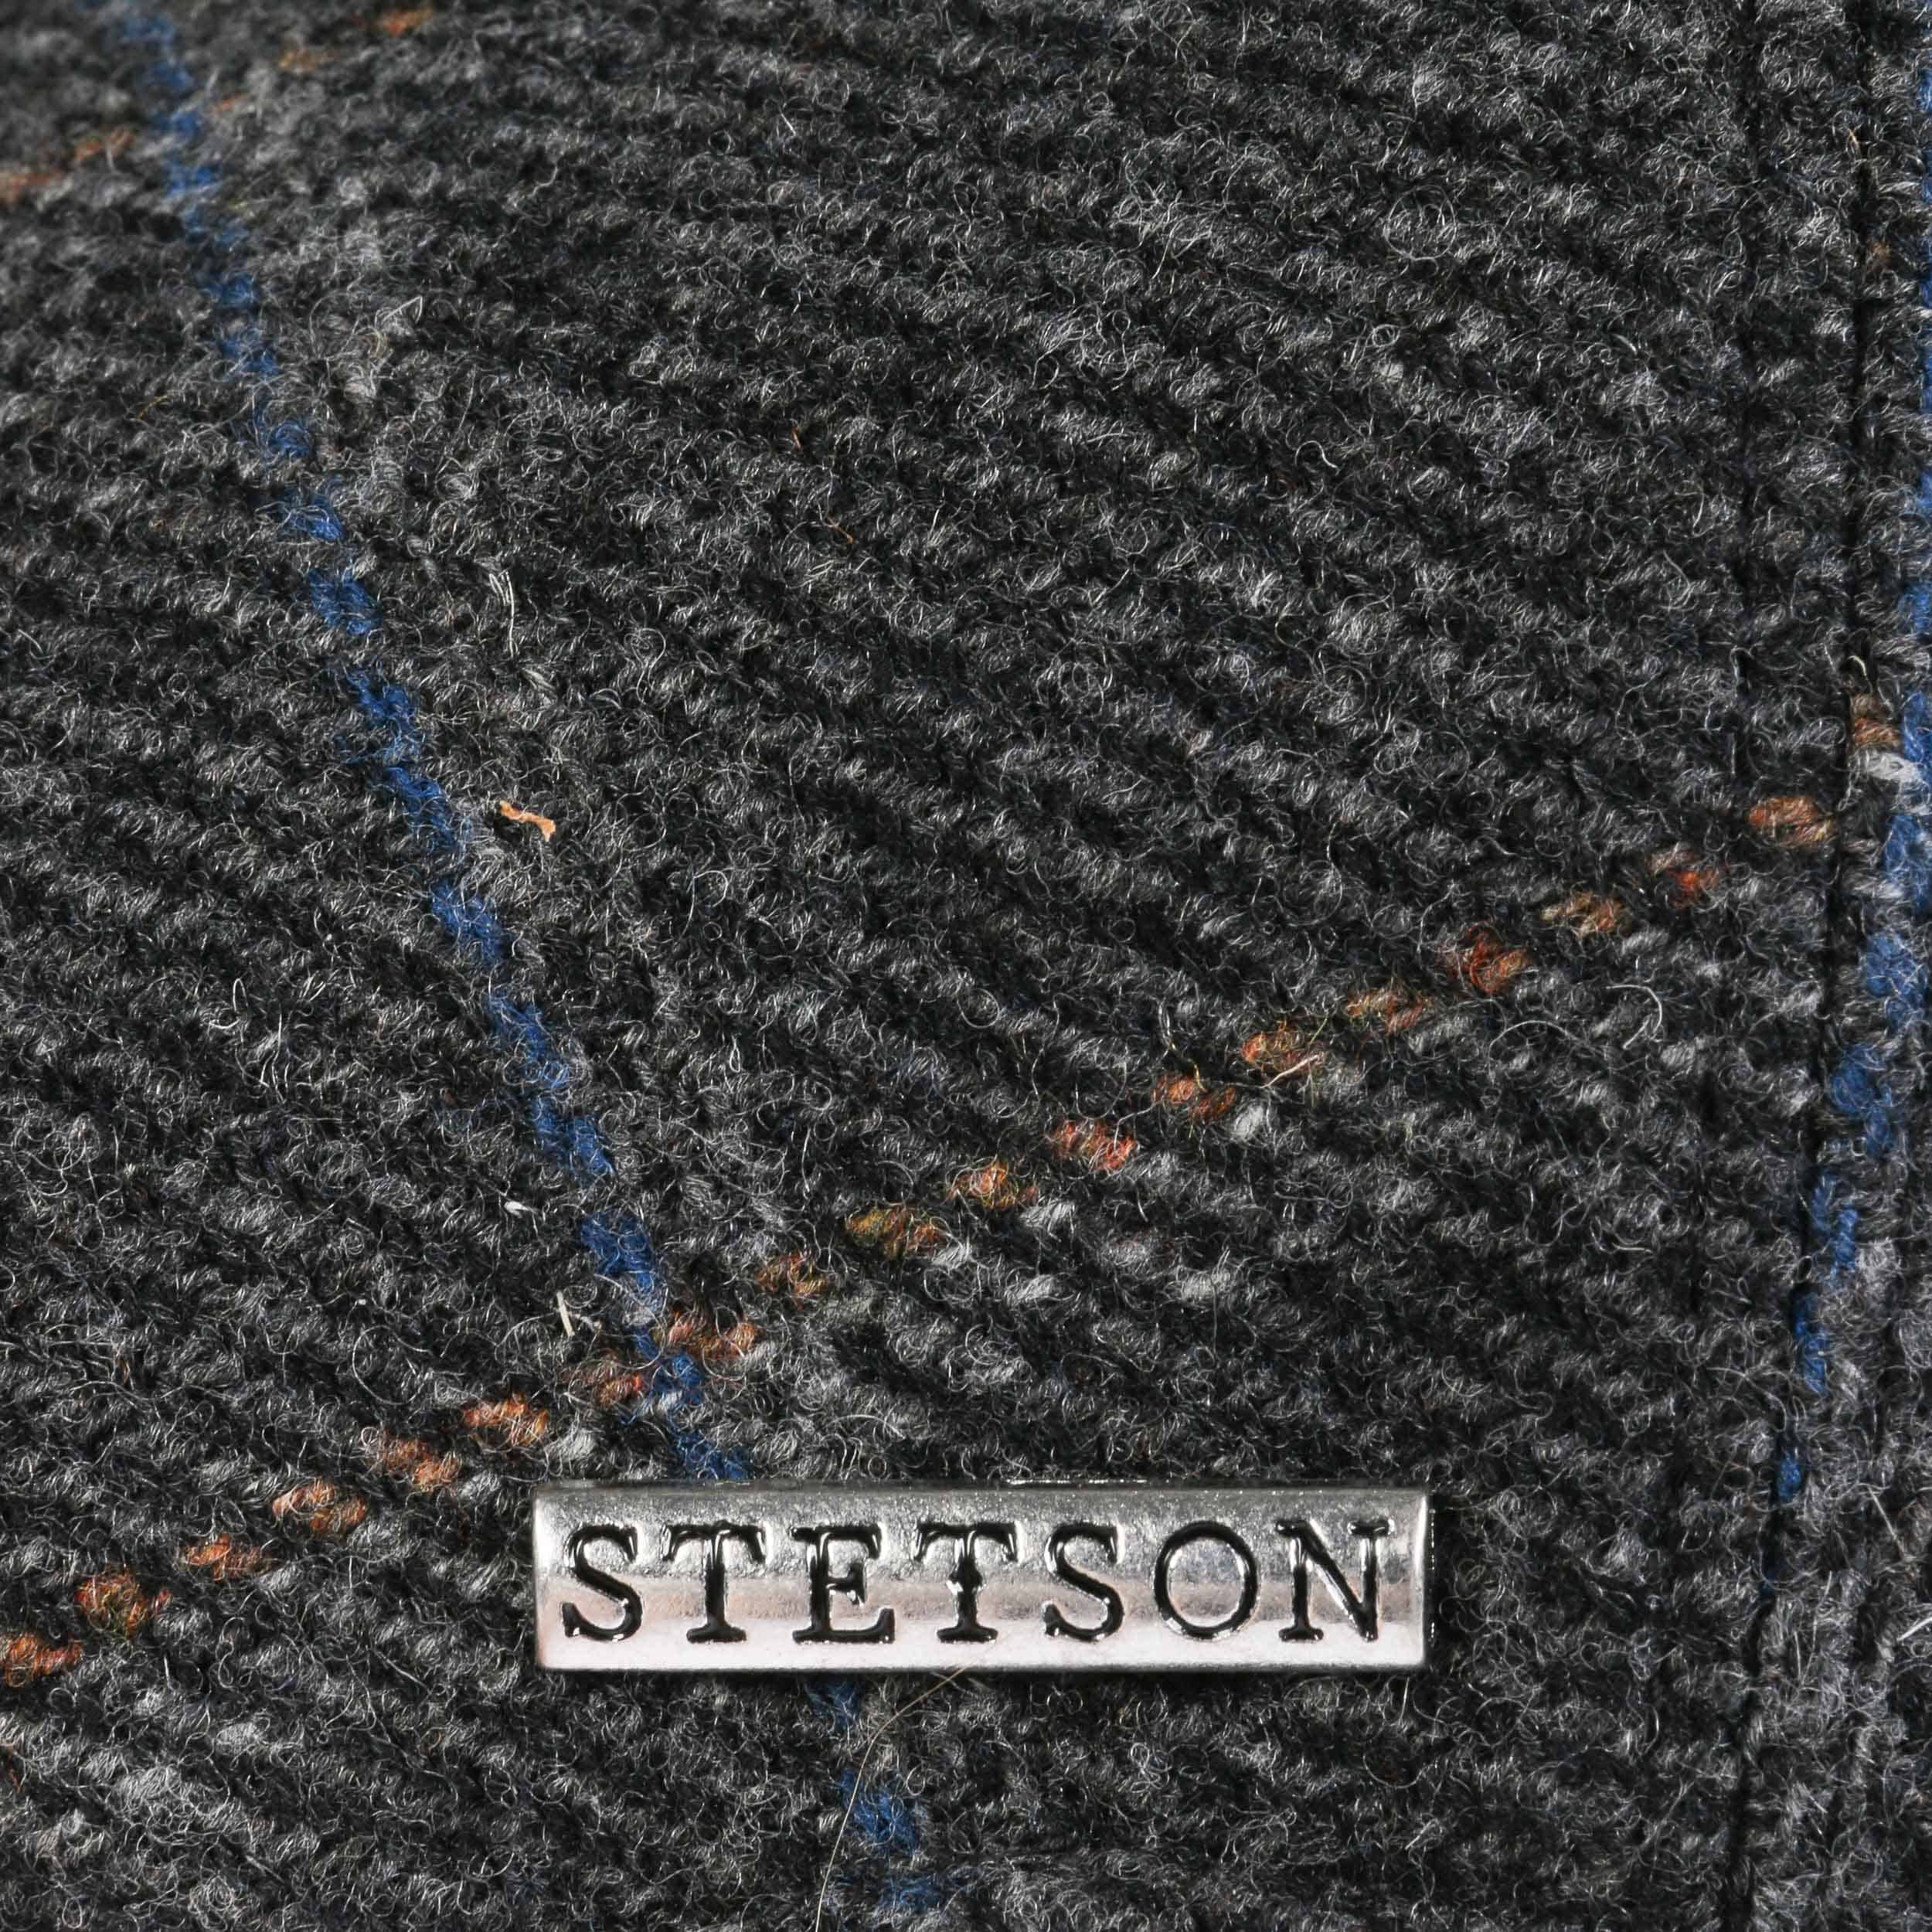 Sussex Wool Flat Cap by Stetson - 59,00